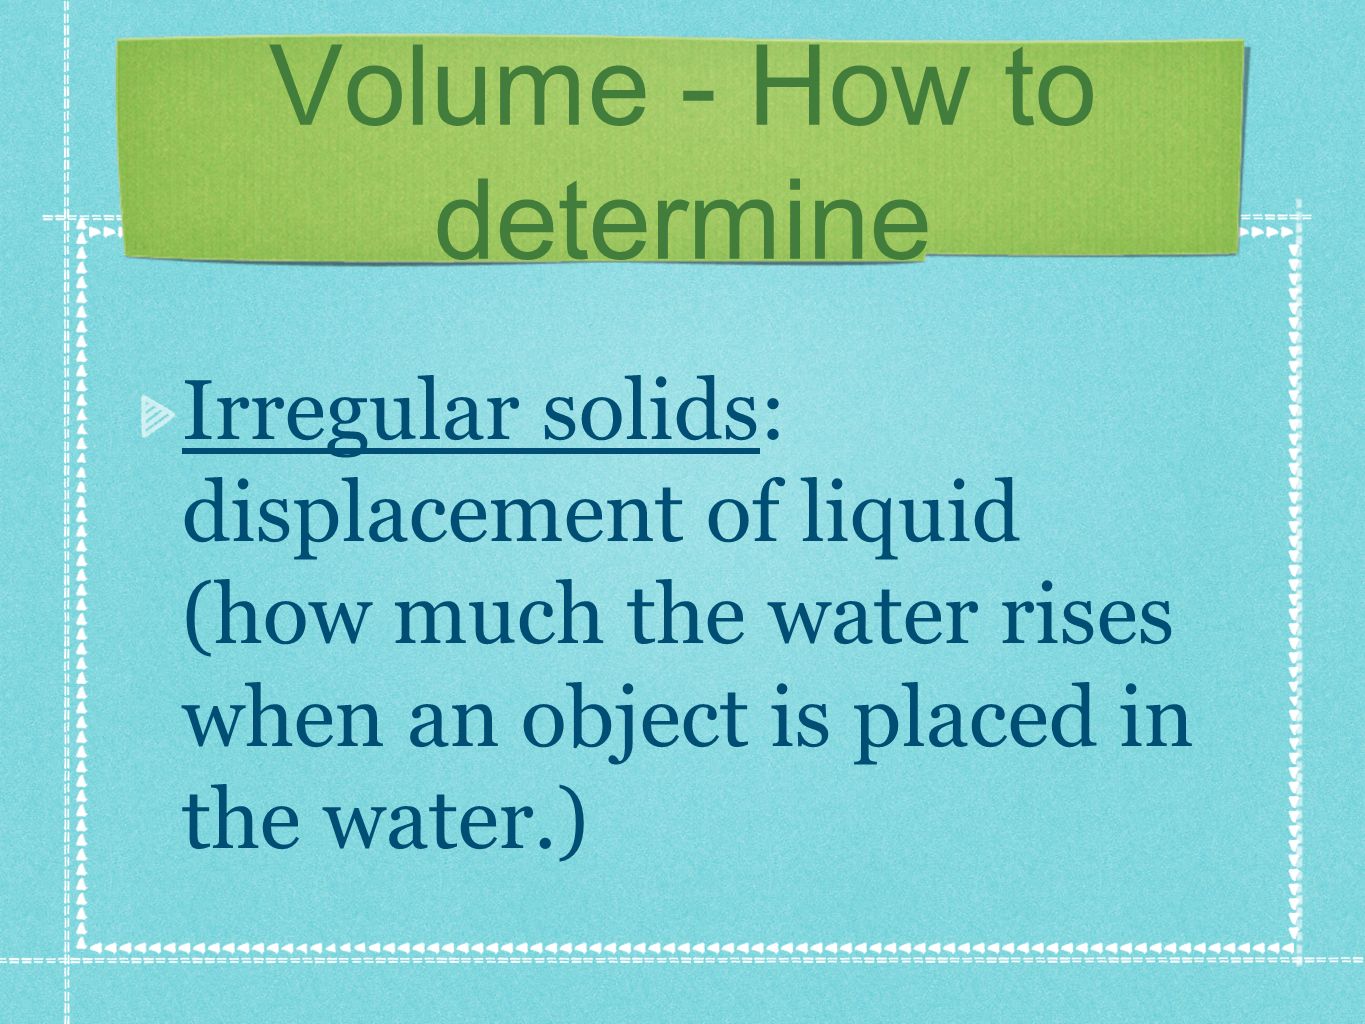 Volume - How to determine Irregular solids: displacement of liquid (how much the water rises when an object is placed in the water.)